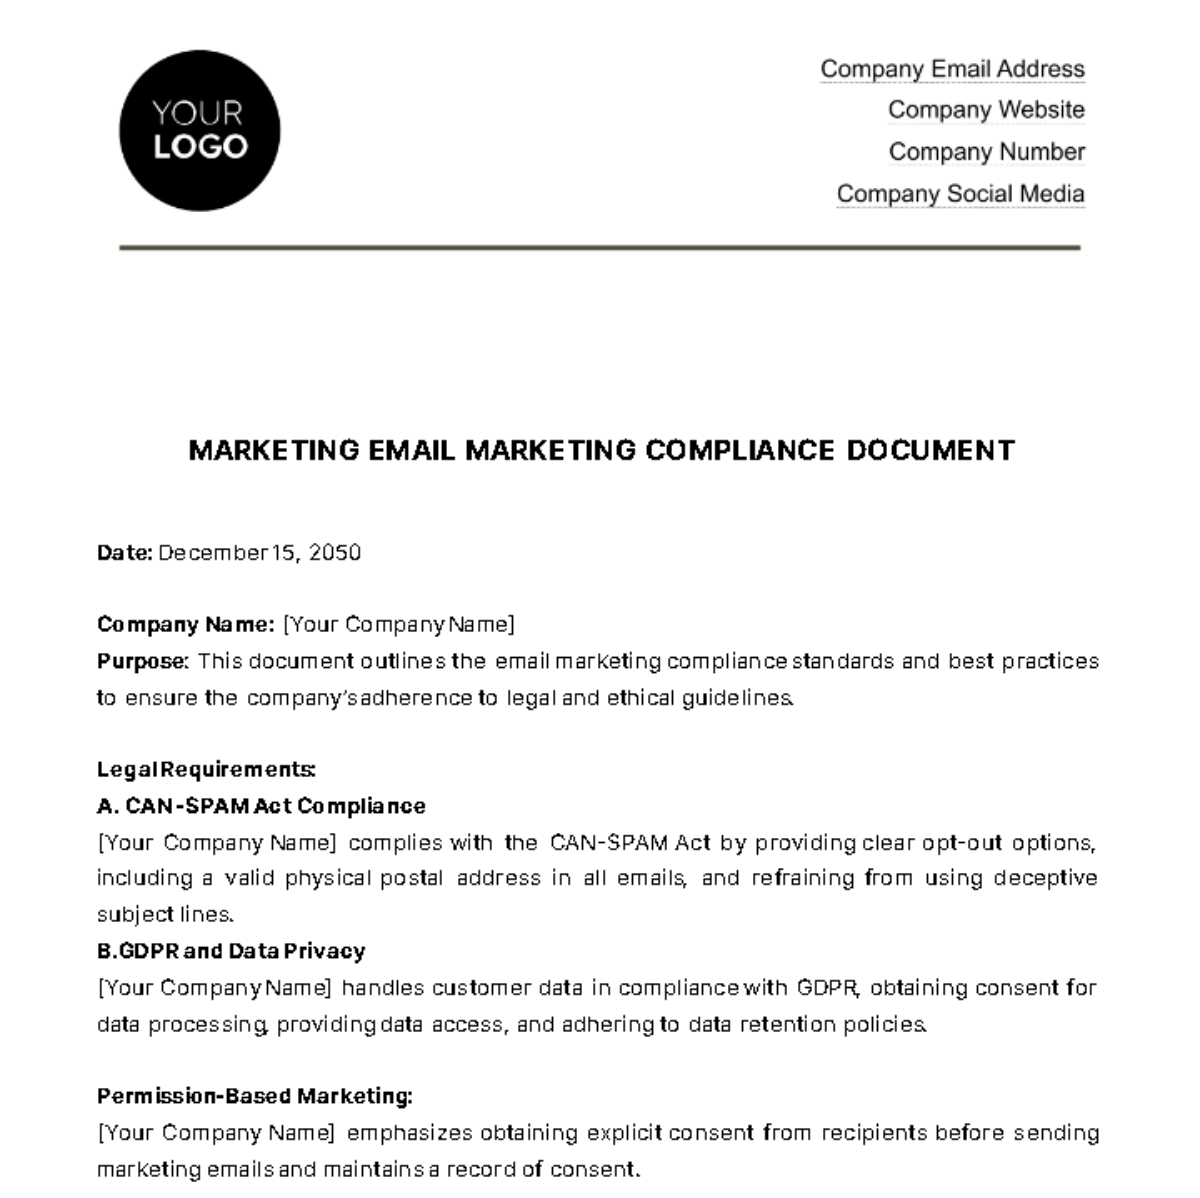 Marketing Email Marketing Compliance Document Template